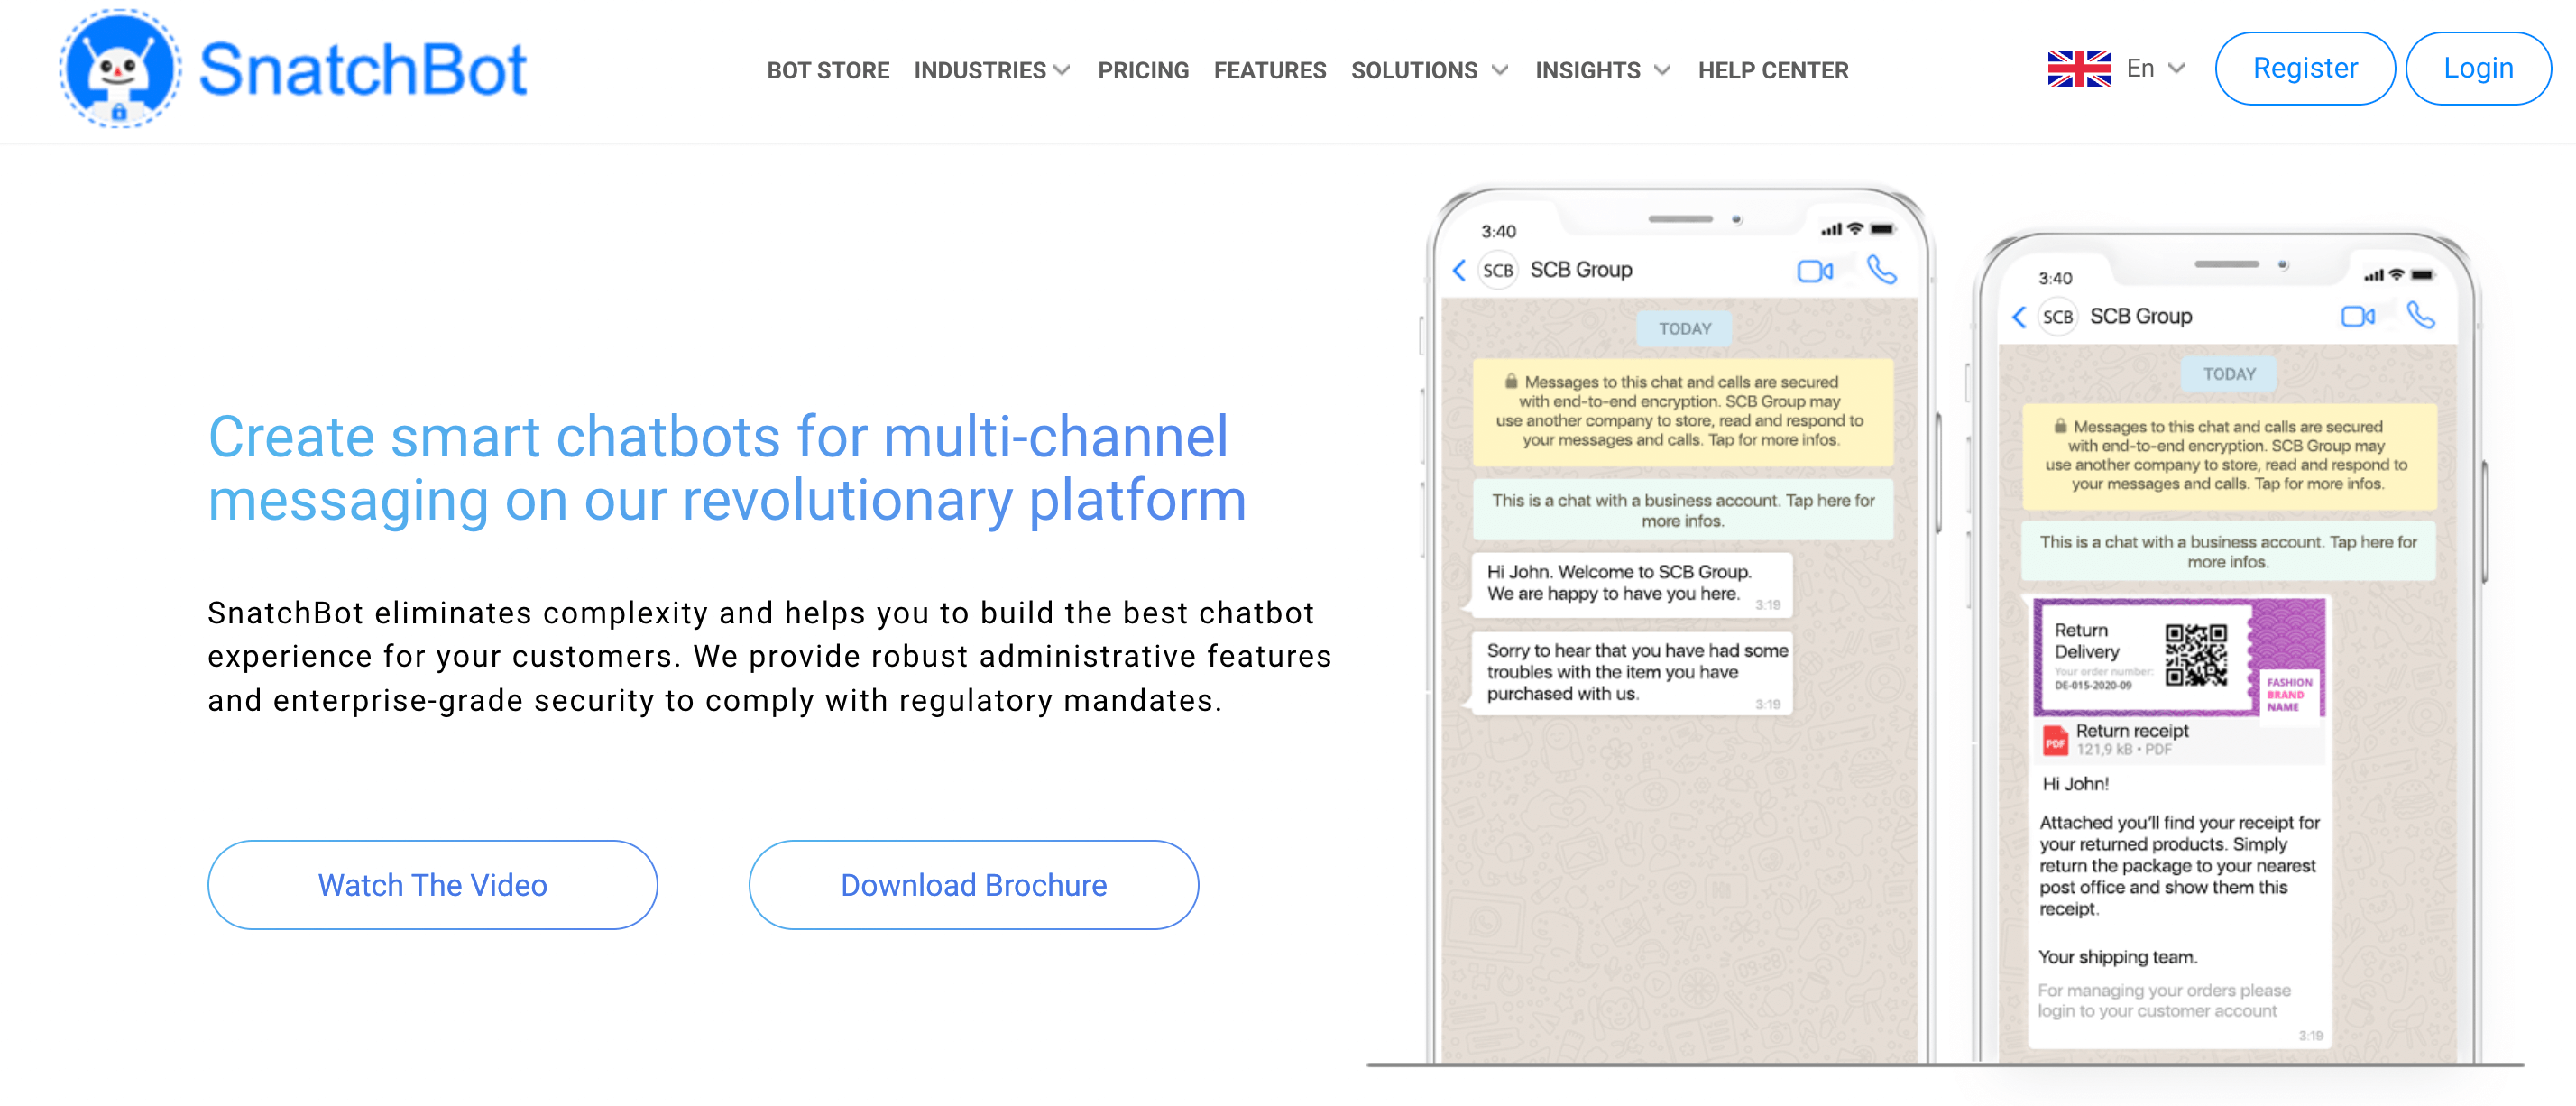 The SnatchBot home page, featuring a headline that says, “Create smart chatbots for multichannel messaging.”